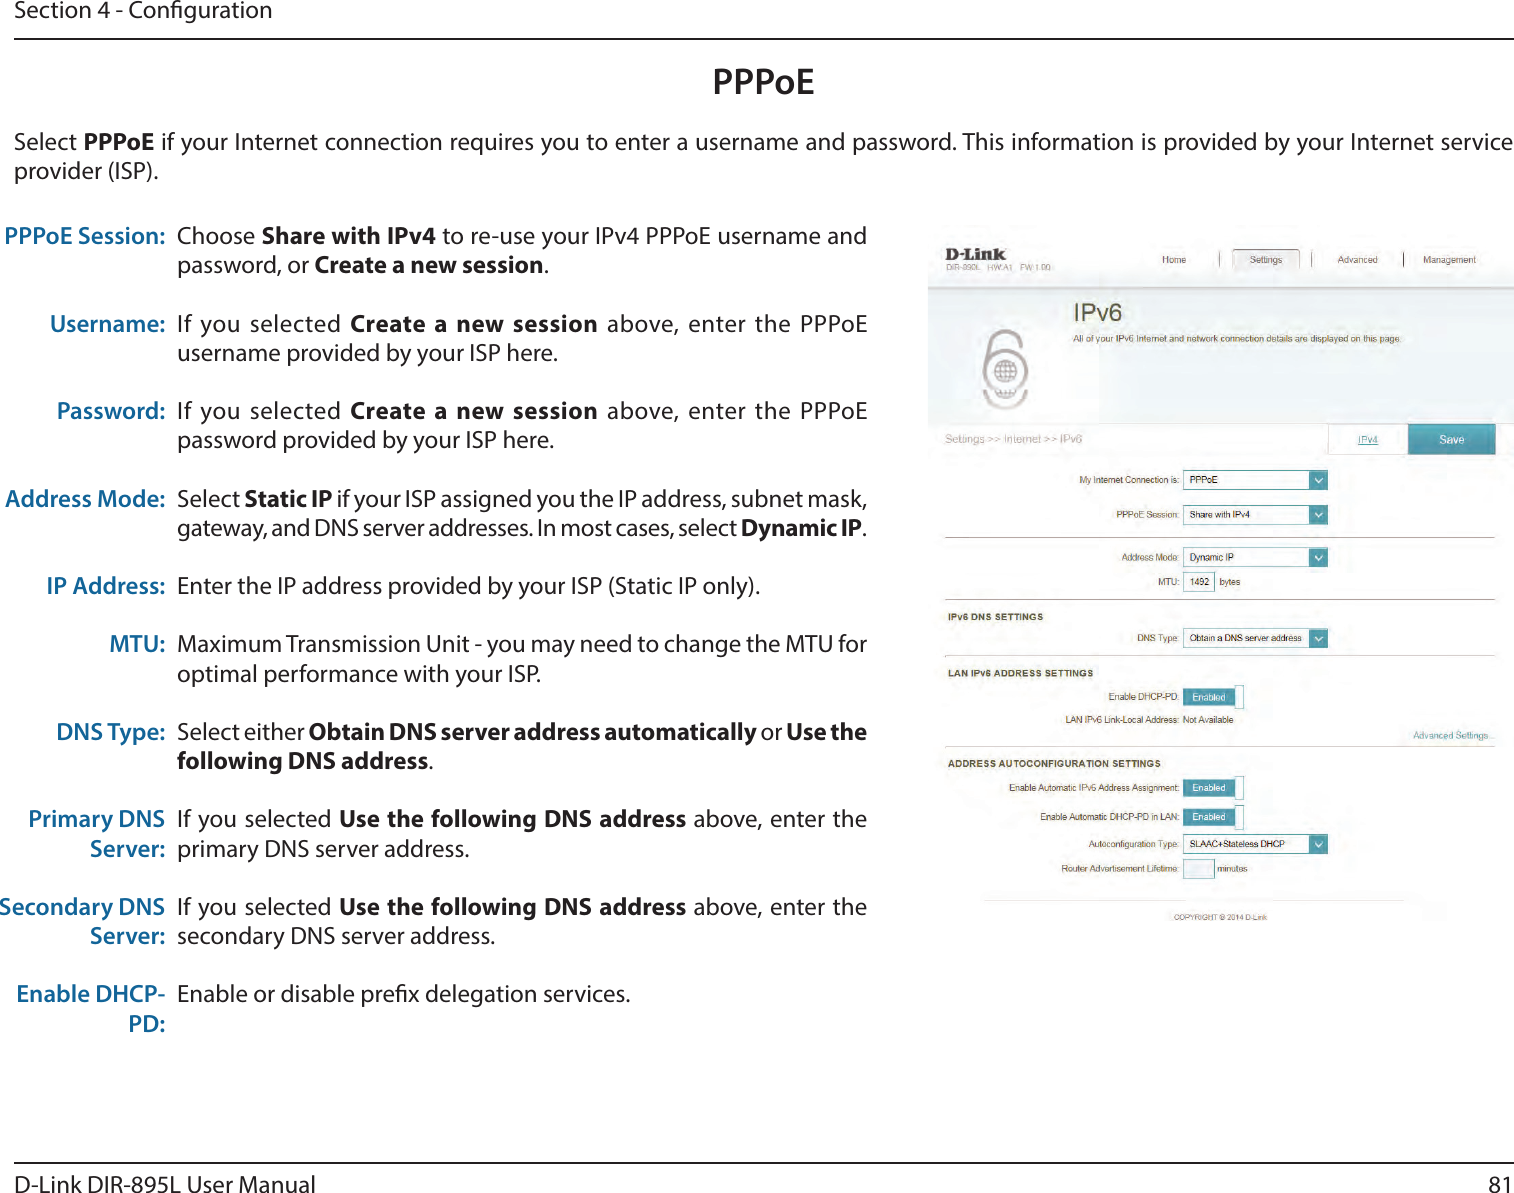 81D-Link DIR-895L User ManualSection 4 - CongurationPPPoEChoose Share with IPv4 to re-use your IPv4 PPPoE username and password, or Create a new session.If you selected Create a new session above, enter the PPPoE username provided by your ISP here.If you selected Create a new session above, enter the PPPoE password provided by your ISP here.Select Static IP if your ISP assigned you the IP address, subnet mask, gateway, and DNS server addresses. In most cases, select Dynamic IP.Enter the IP address provided by your ISP (Static IP only).Maximum Transmission Unit - you may need to change the MTU for optimal performance with your ISP.Select either Obtain DNS server address automatically or Use the following DNS address.If you selected Use the following DNS address above, enter the primary DNS server address. If you selected Use the following DNS address above, enter the secondary DNS server address.Enable or disable prex delegation services.PPPoE Session:Username:Password:Address Mode:IP Address:MTU:DNS Type:Primary DNS Server:Secondary DNS Server:Enable DHCP-PD:Select PPPoE if your Internet connection requires you to enter a username and password. This information is provided by your Internet service provider (ISP).